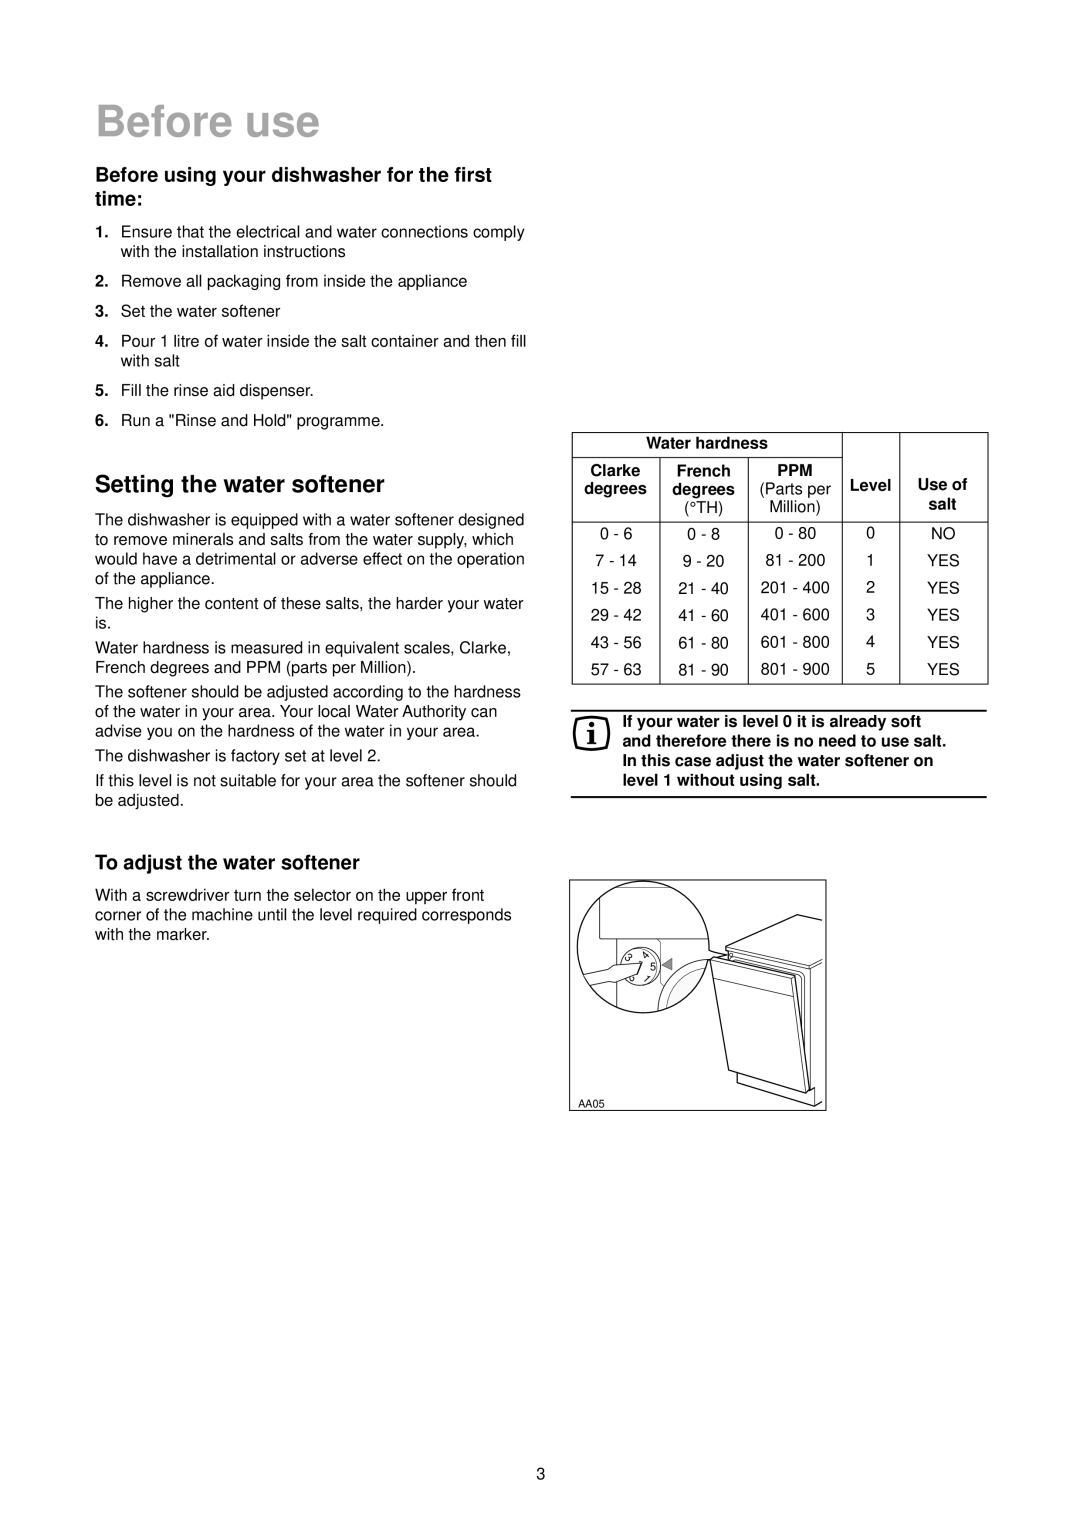 Tricity Bendix DH 102 manual Before use, Setting the water softener 